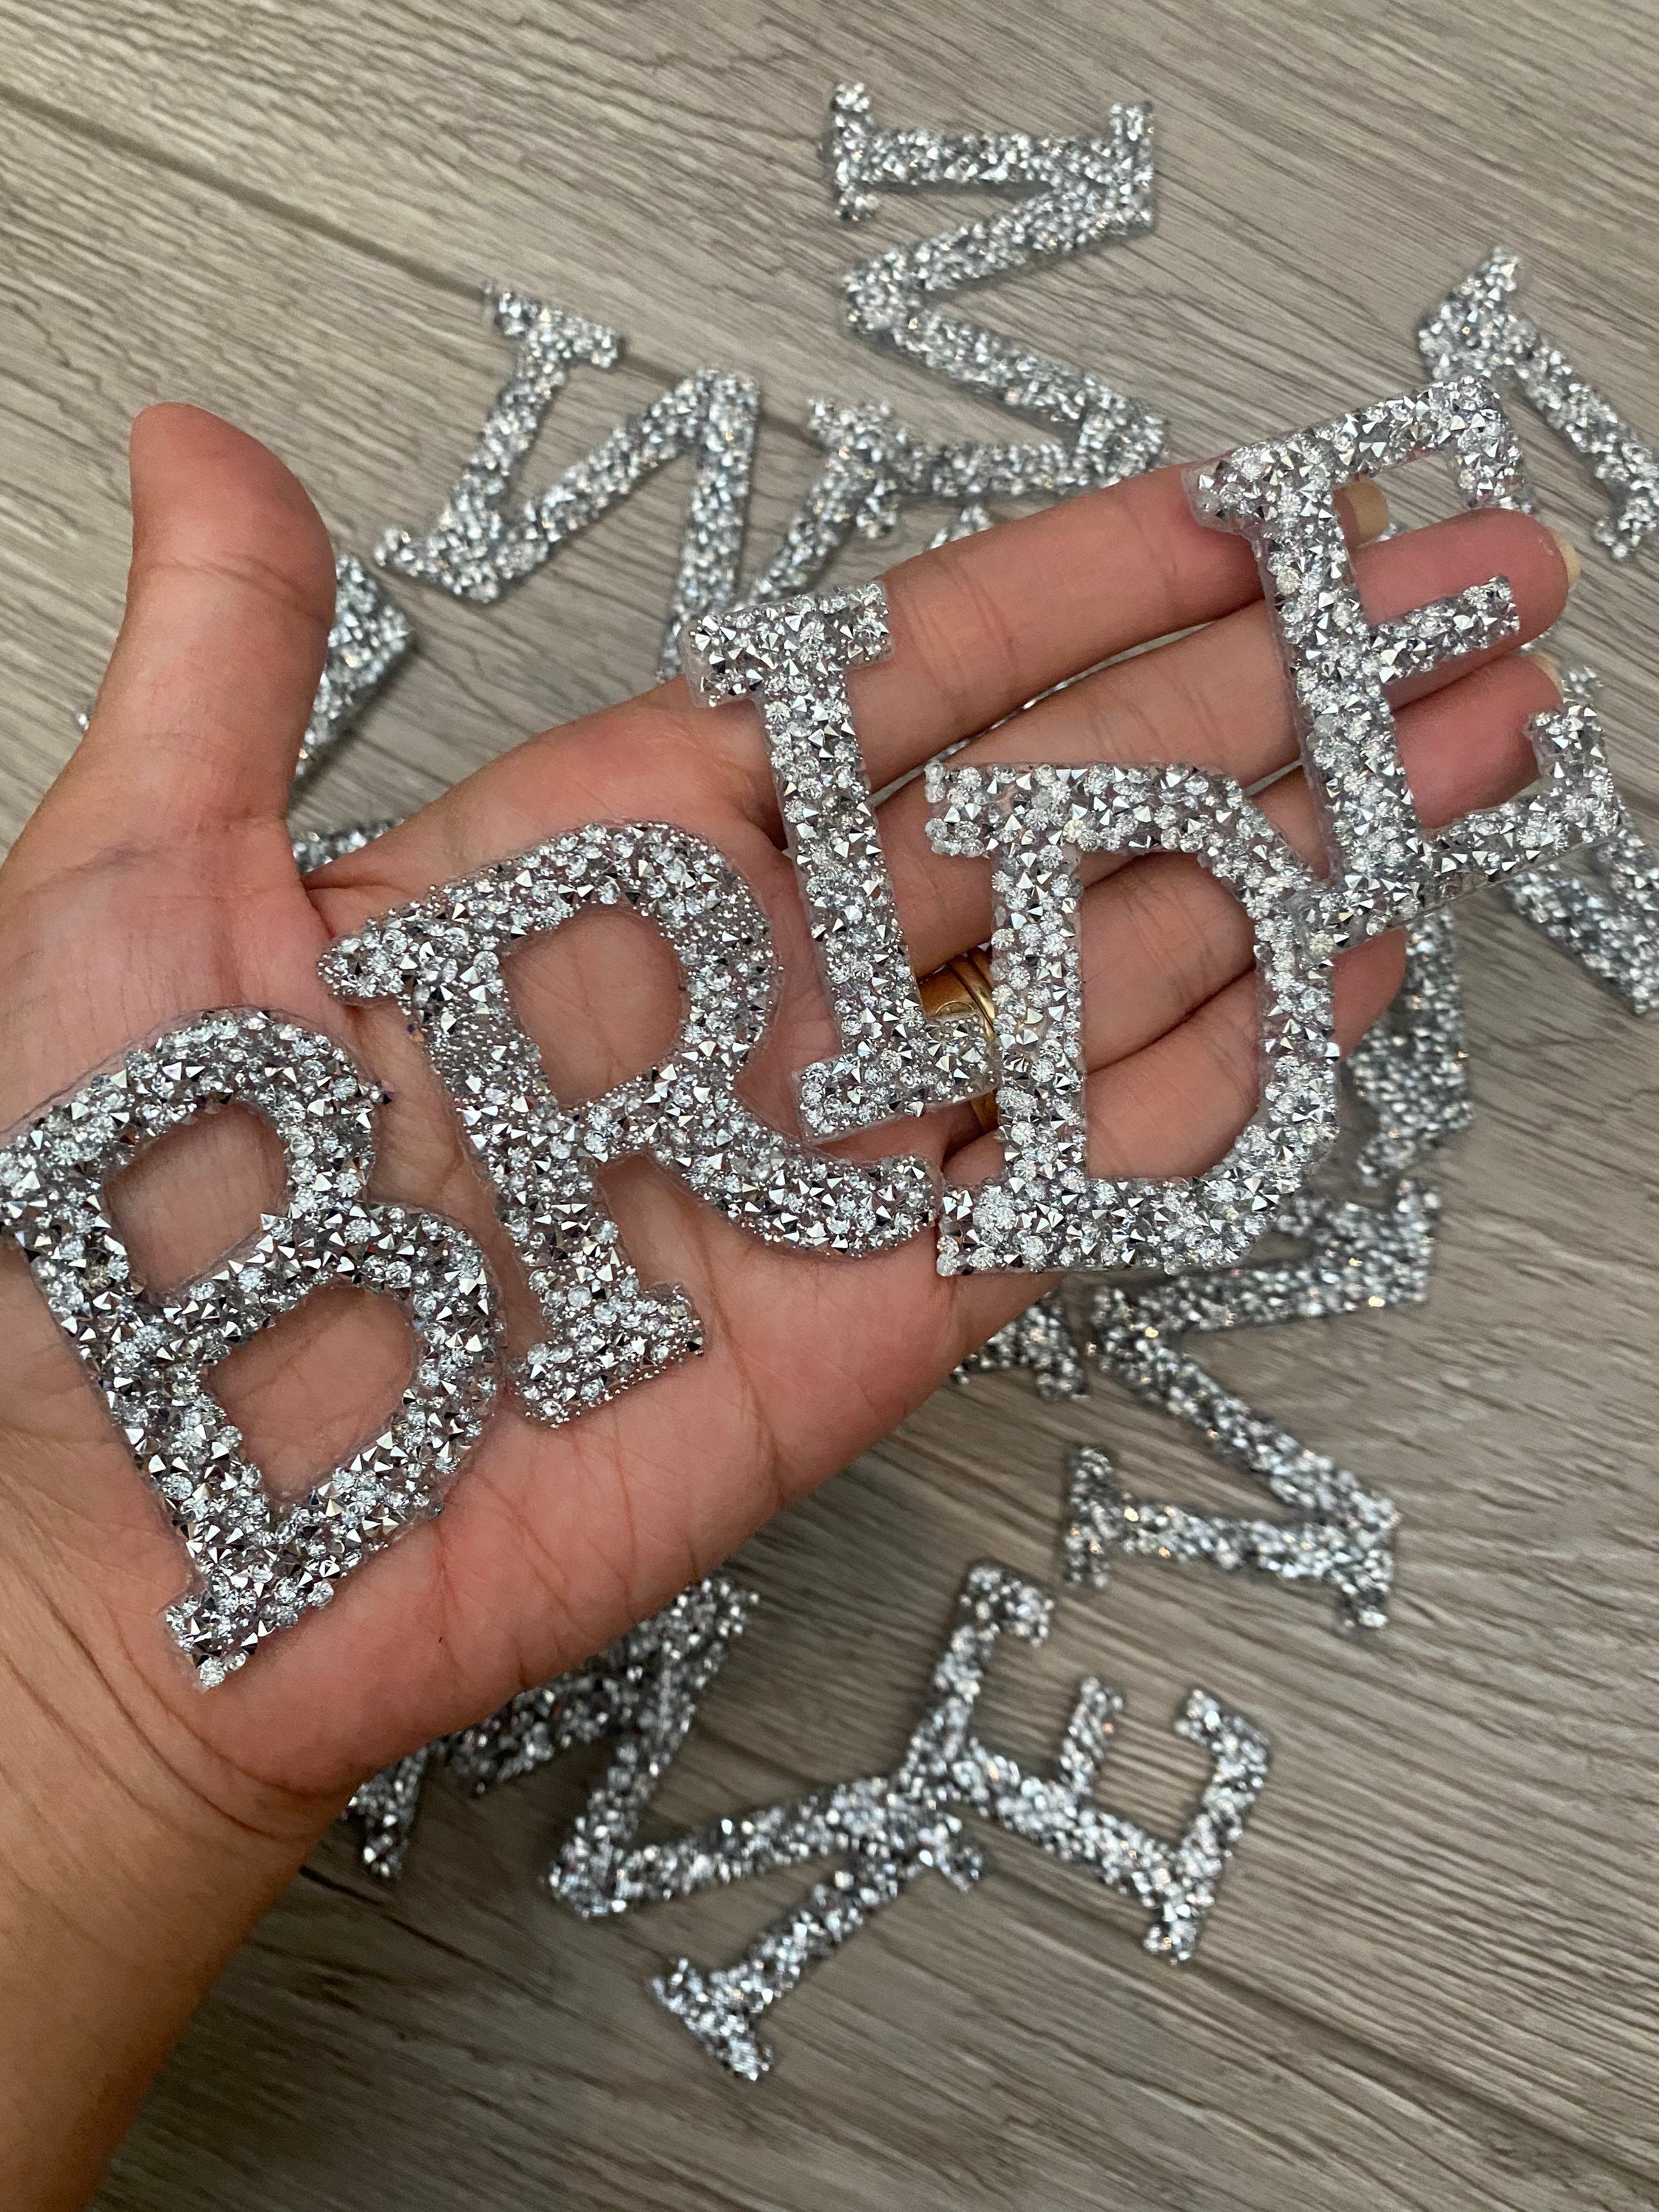 Rhinestone Iron on Letters, Iron on Letters, Rhinestone Letter, Diy  Letters, Diy Iron On, Diy Jacket, Rhinestone Patches, Iron on Patches 